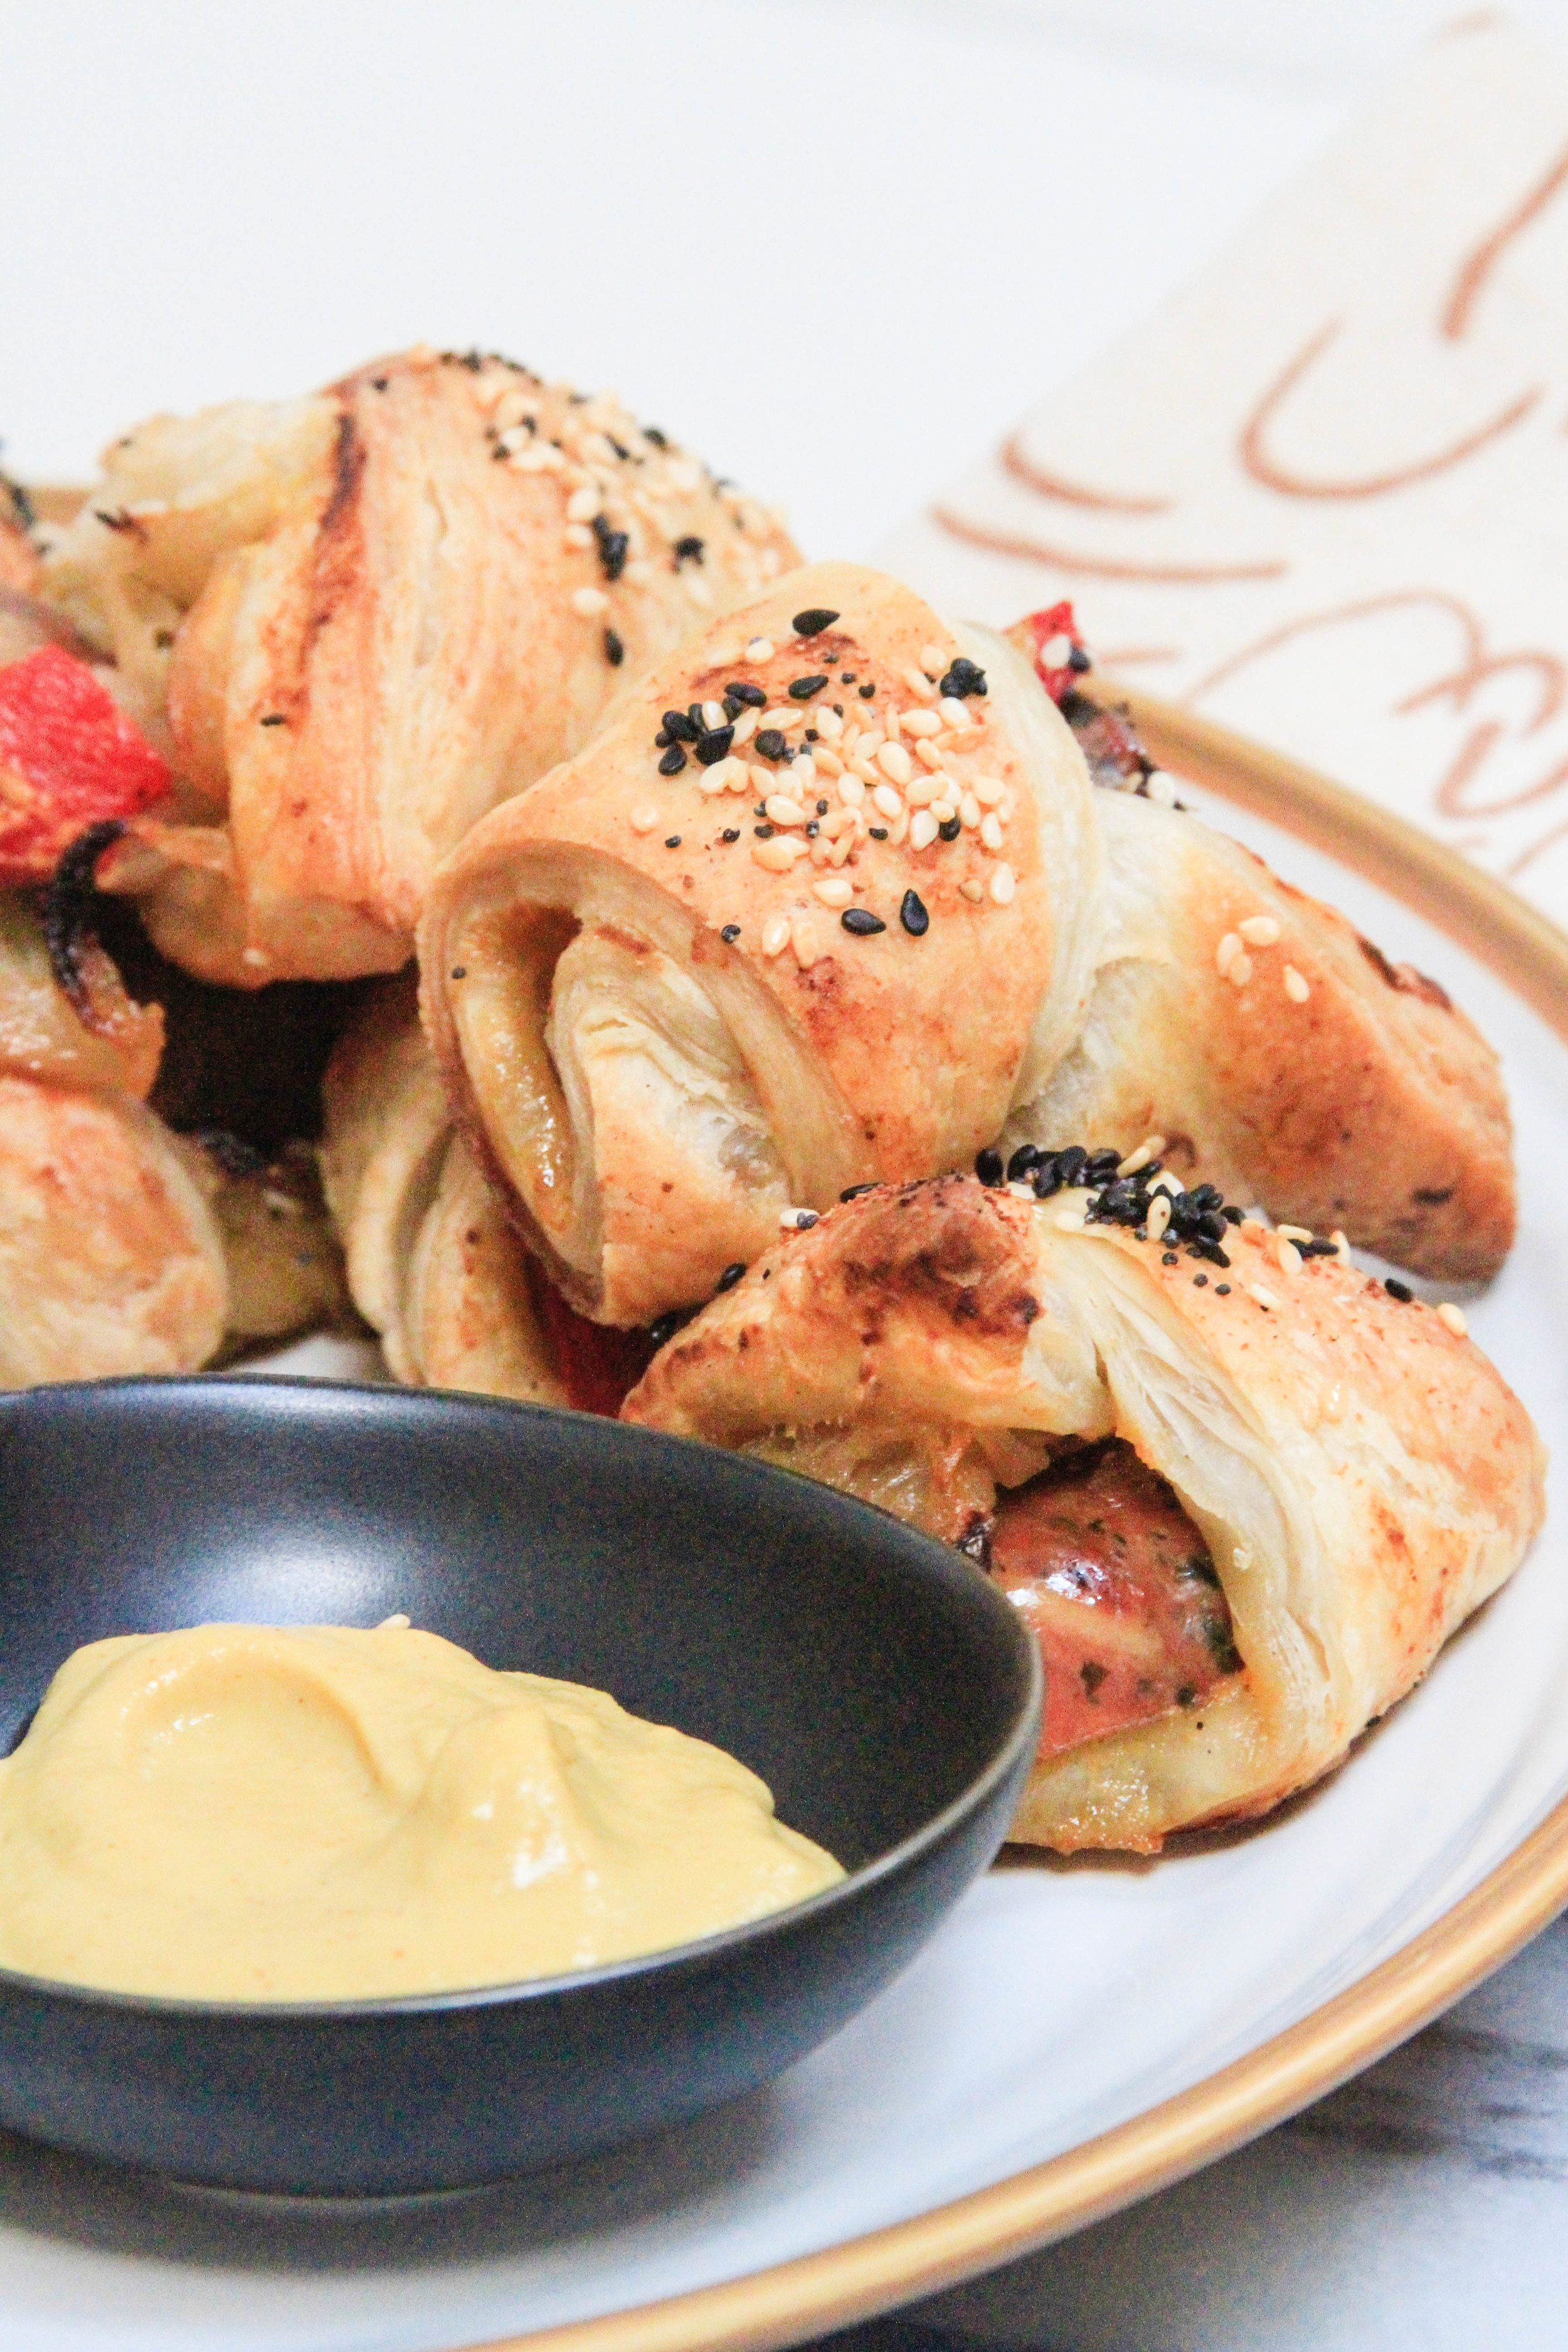 Sausage + pepper pigs in a blanket